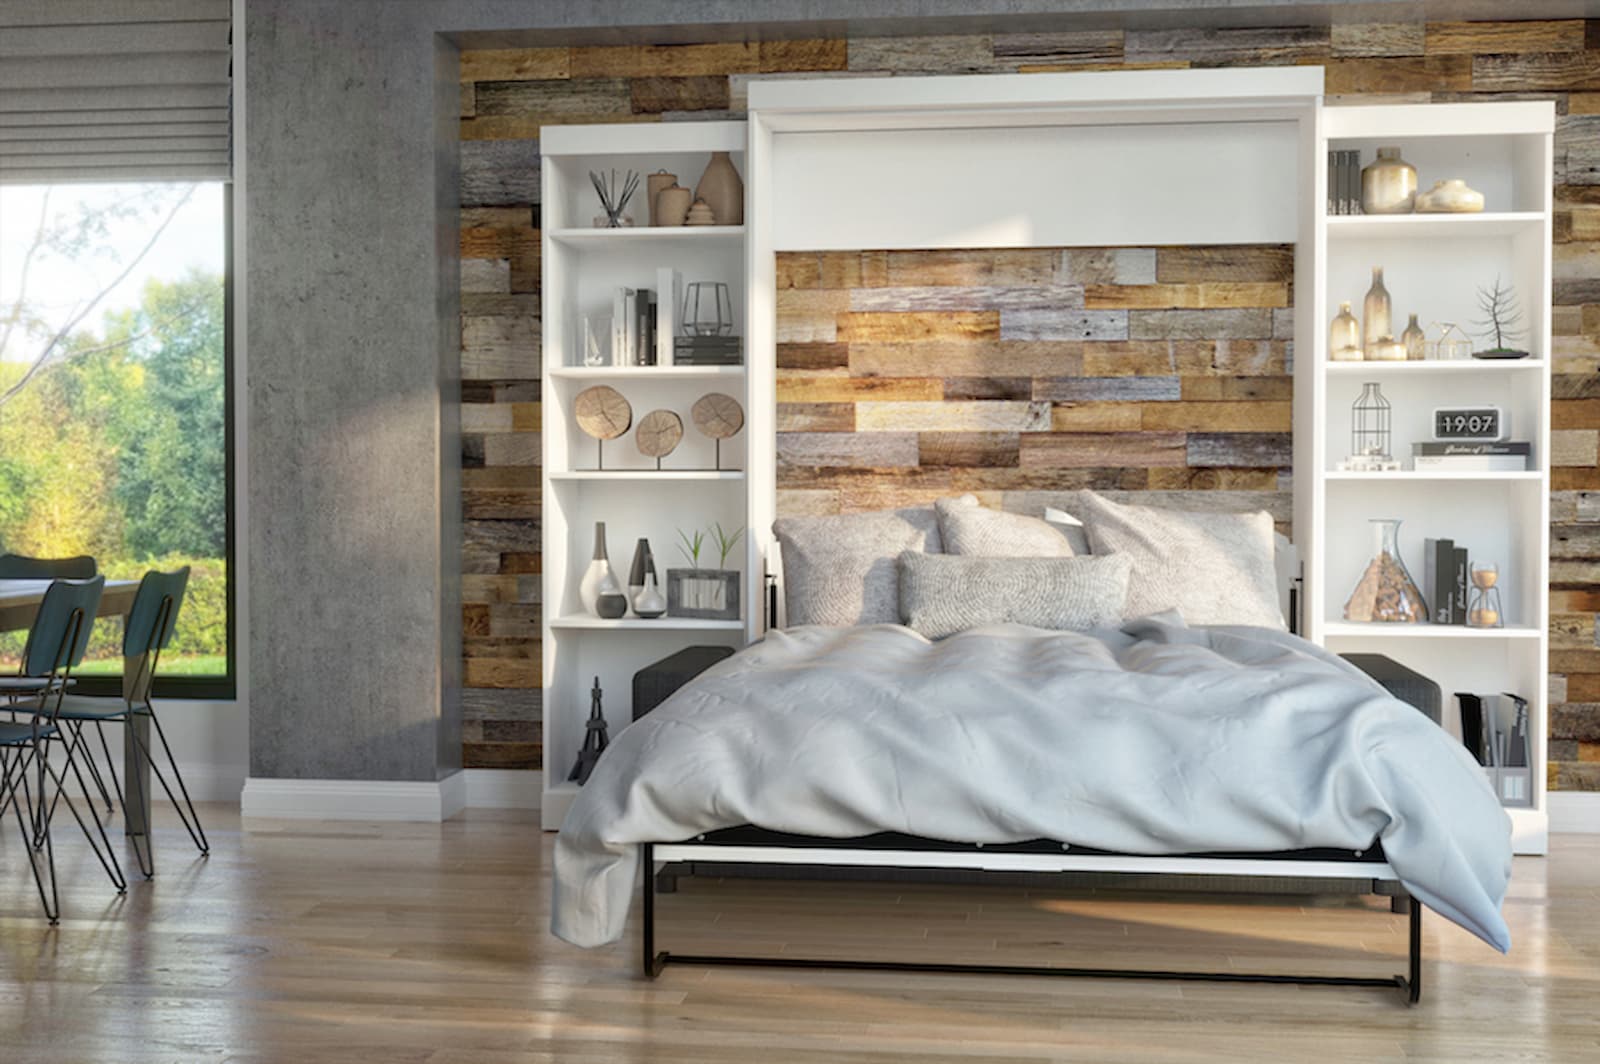 Multipurpose Pieces Your Home Needs: A Murphy Bed with Couch - Bestar